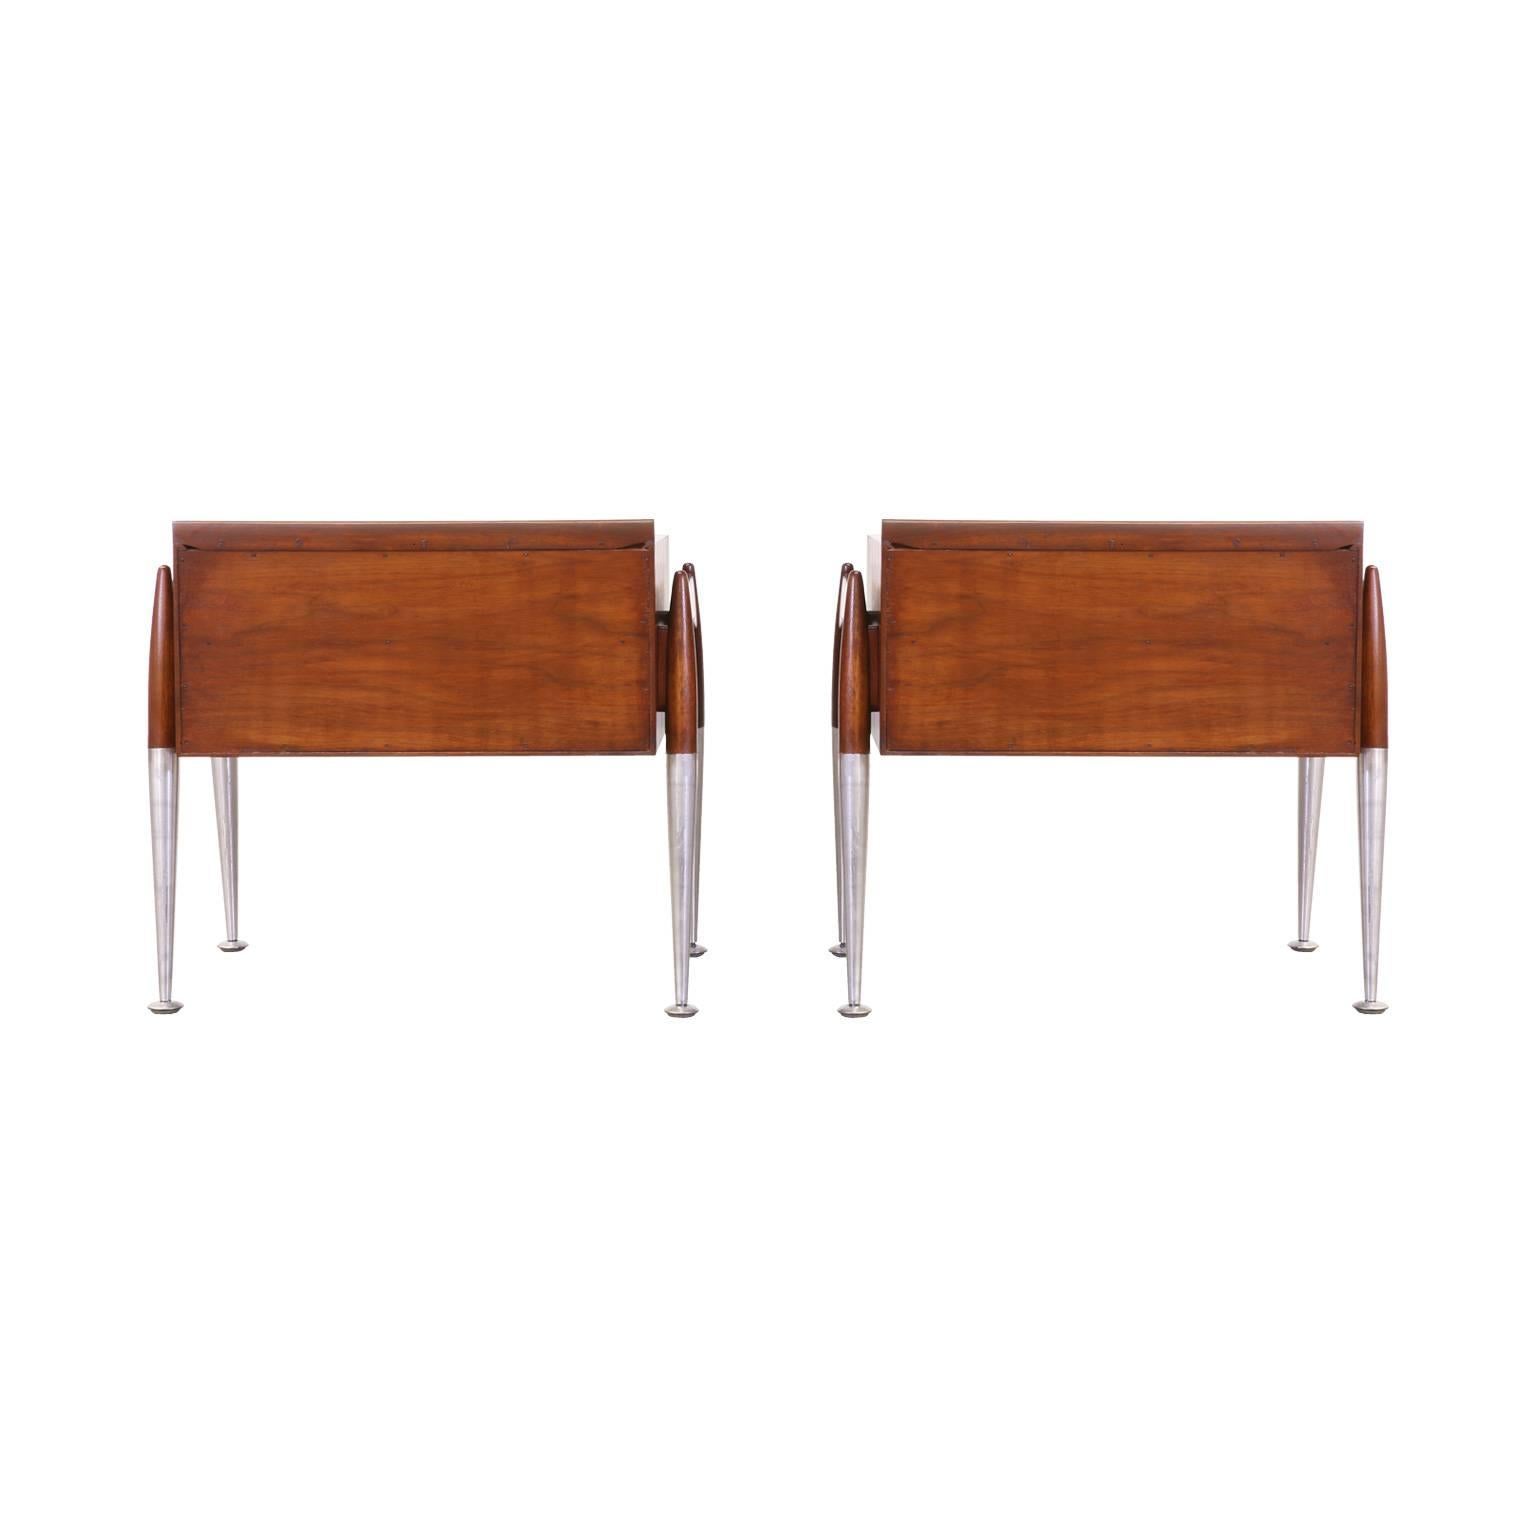 American Midcentury Walnut and Steel Floating Night Stands